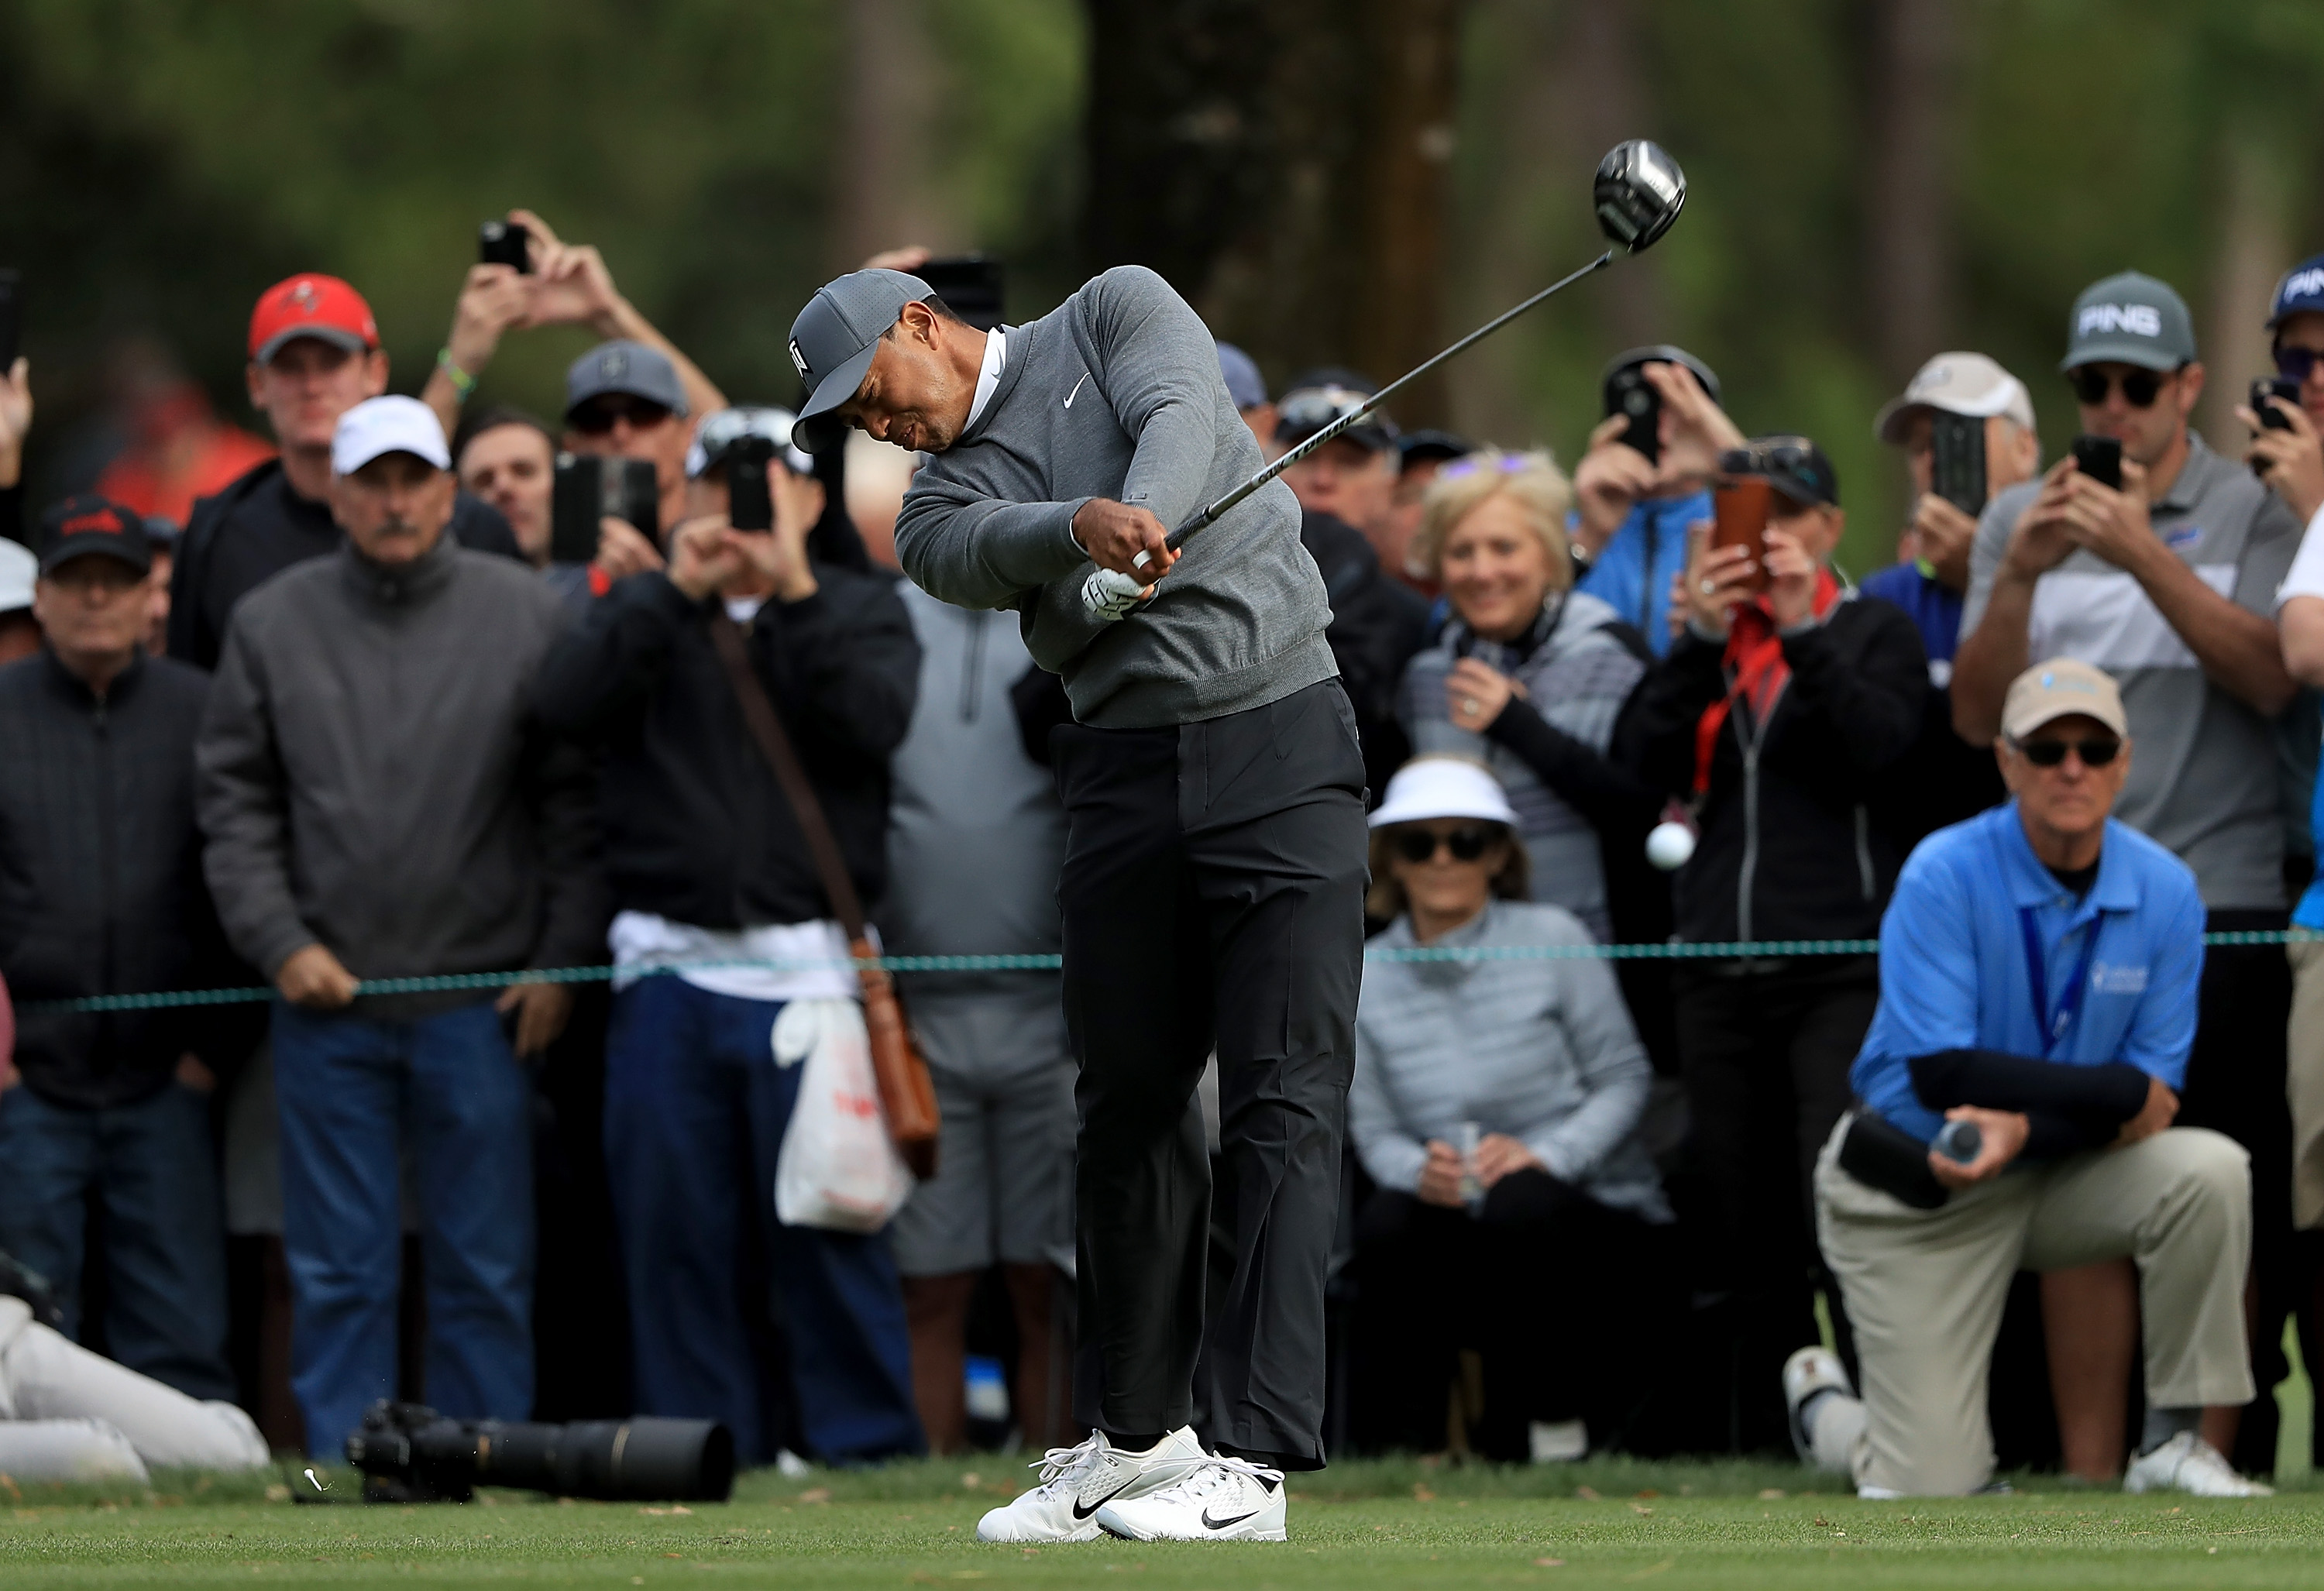 See how Tiger's clubhead speed compares to players in his age bracket on Tour